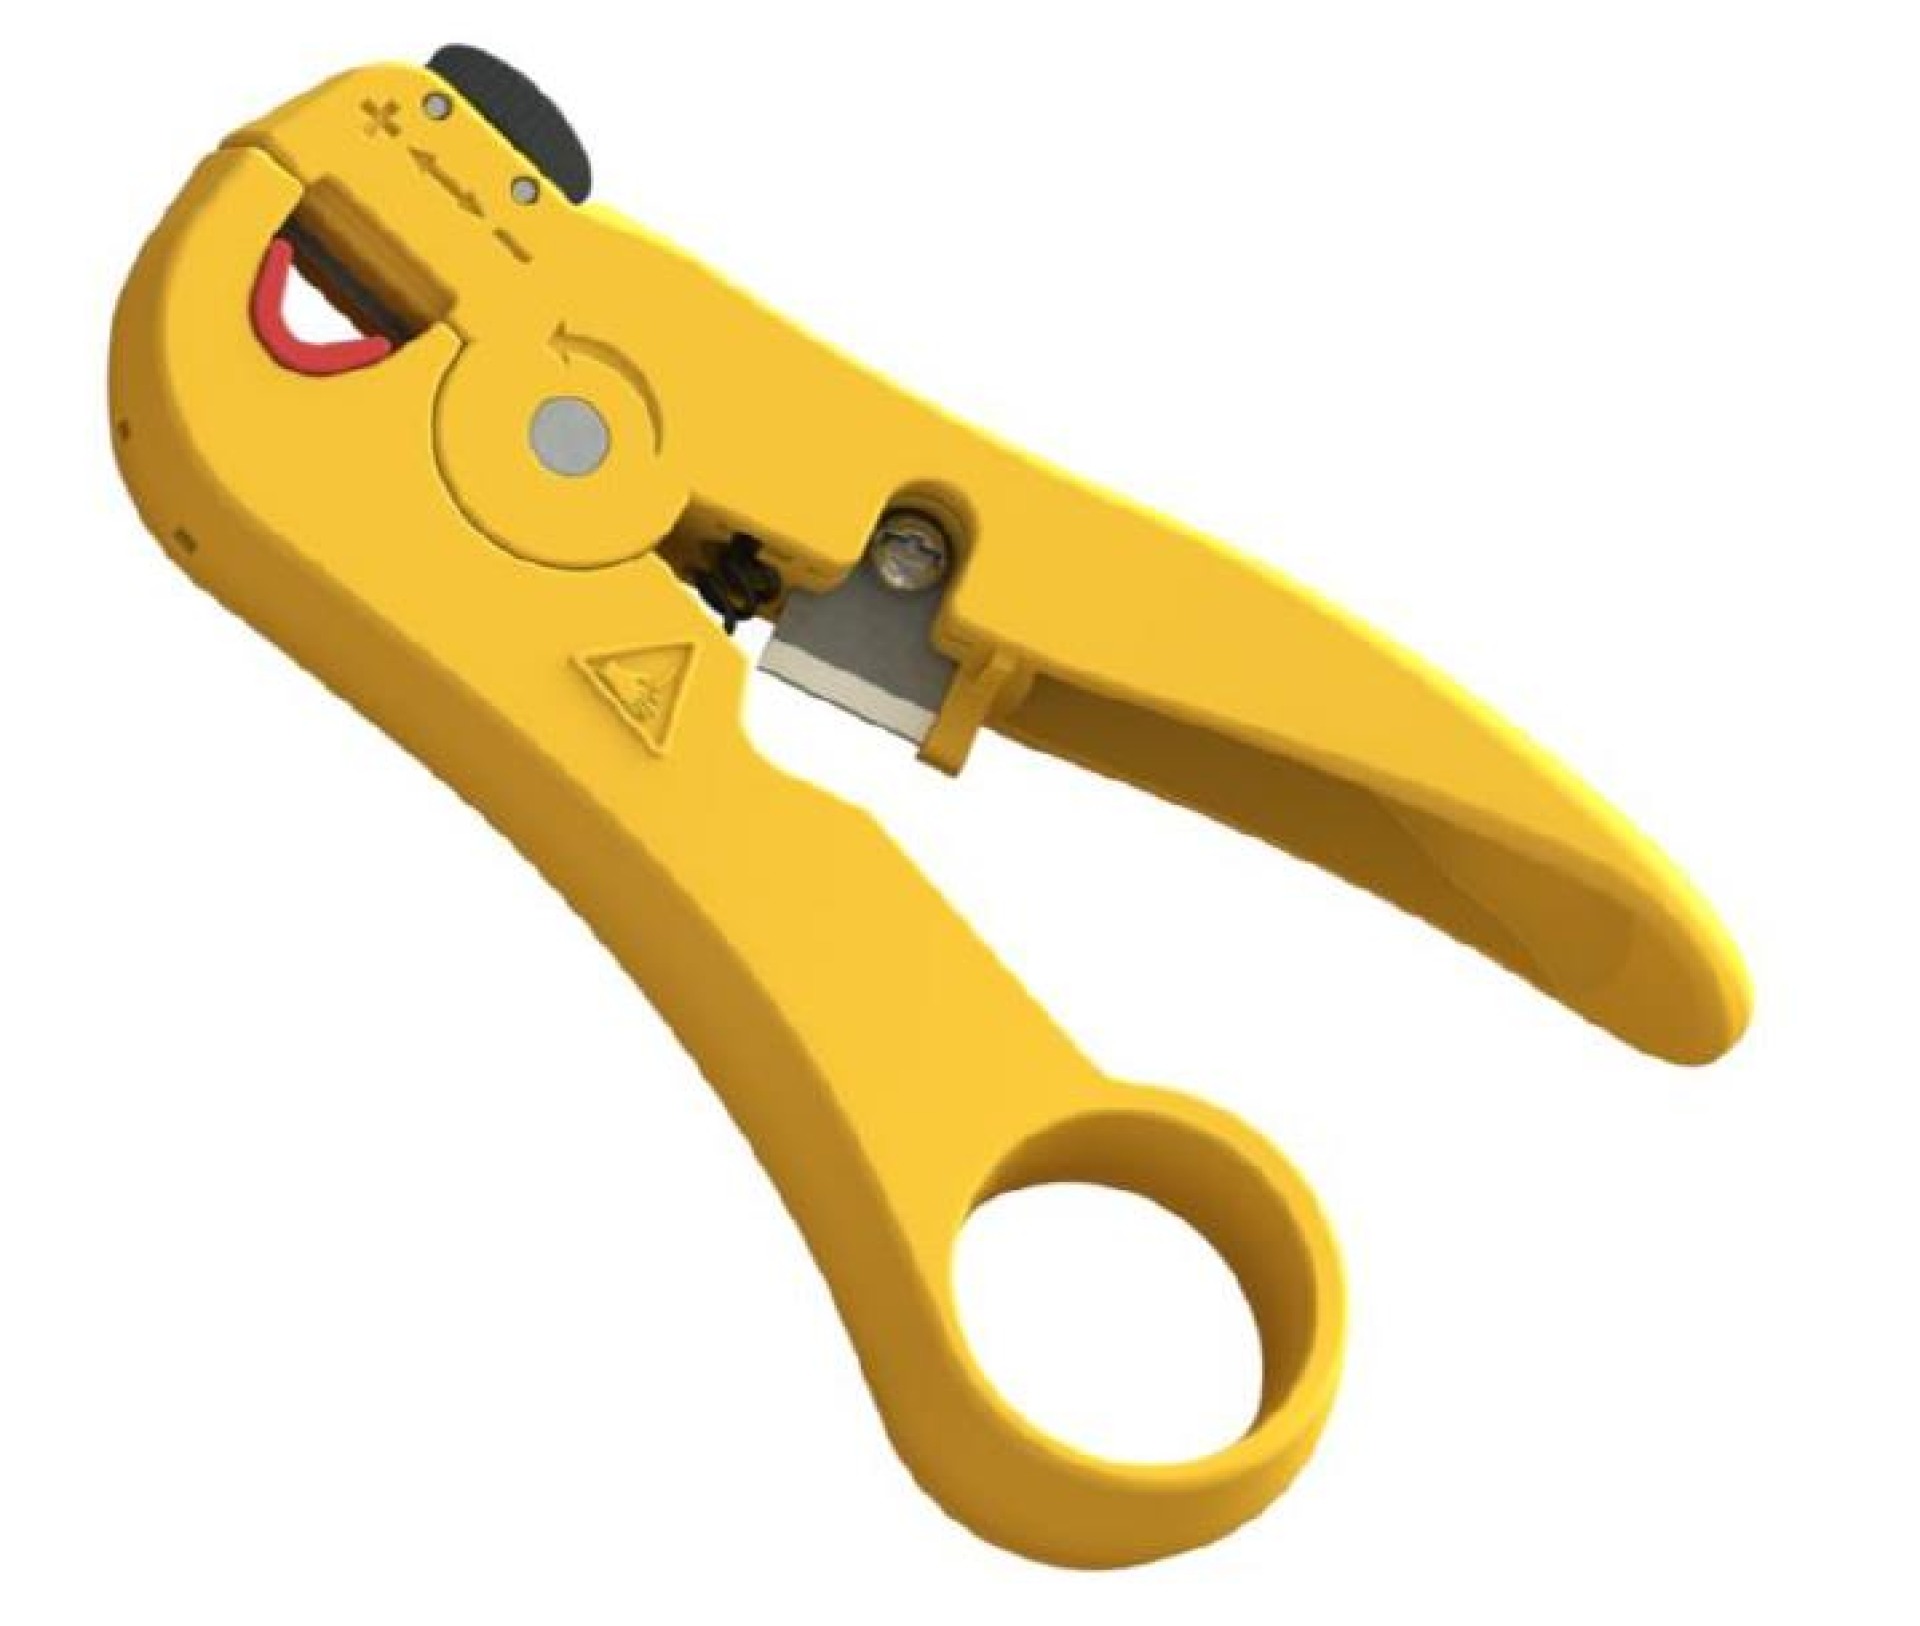 Cable Stripping Tool for cable, 3,5mm - 9mm